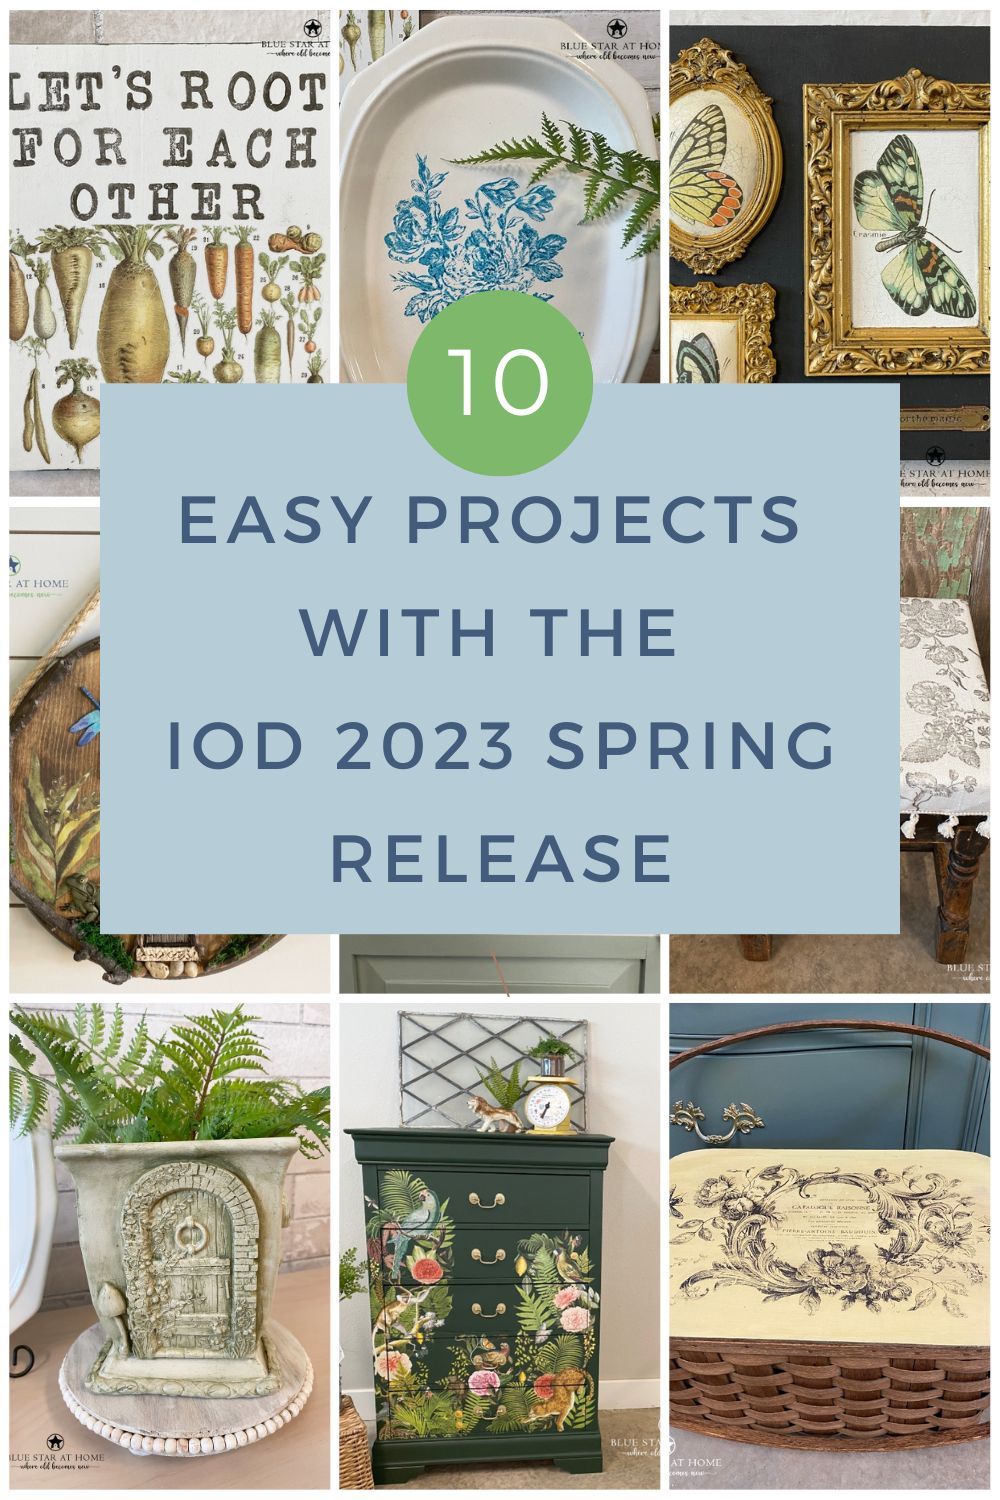 Ten easy projects with the IOD 2023 spring release